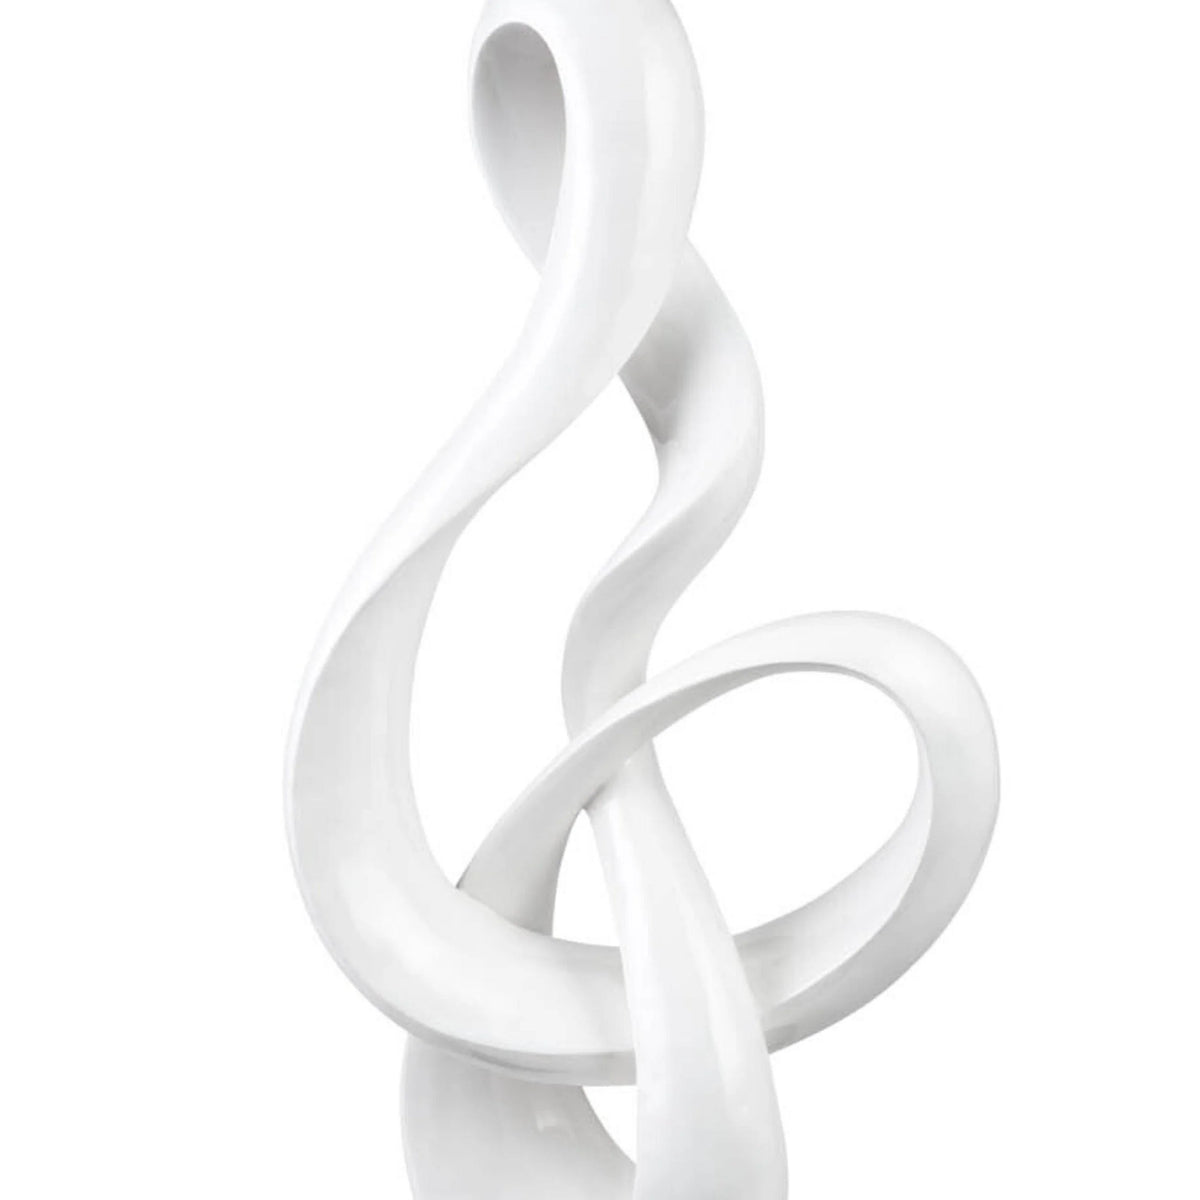 ANTILIA TREBLE ABSTRACT SCULPTURE - LARGE WHITE AND SMALL WHITE